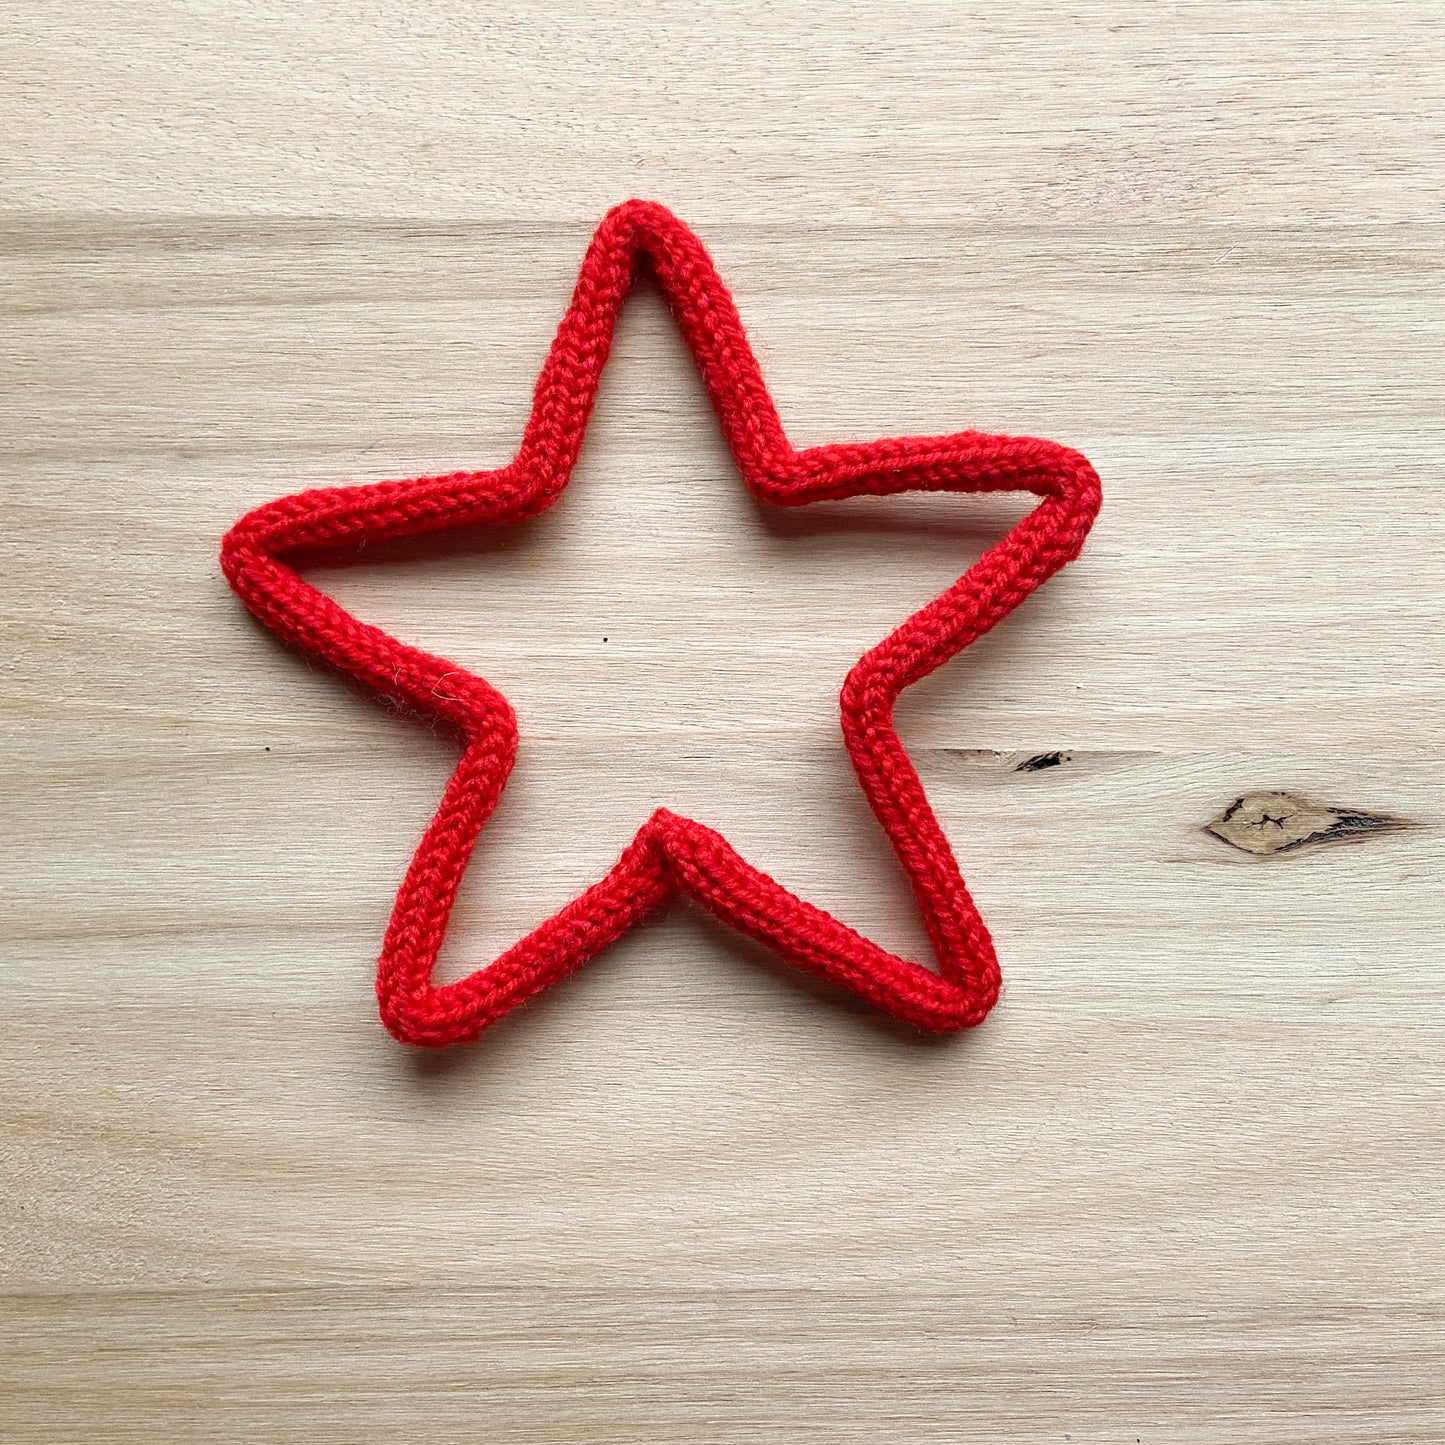 Knitted Star